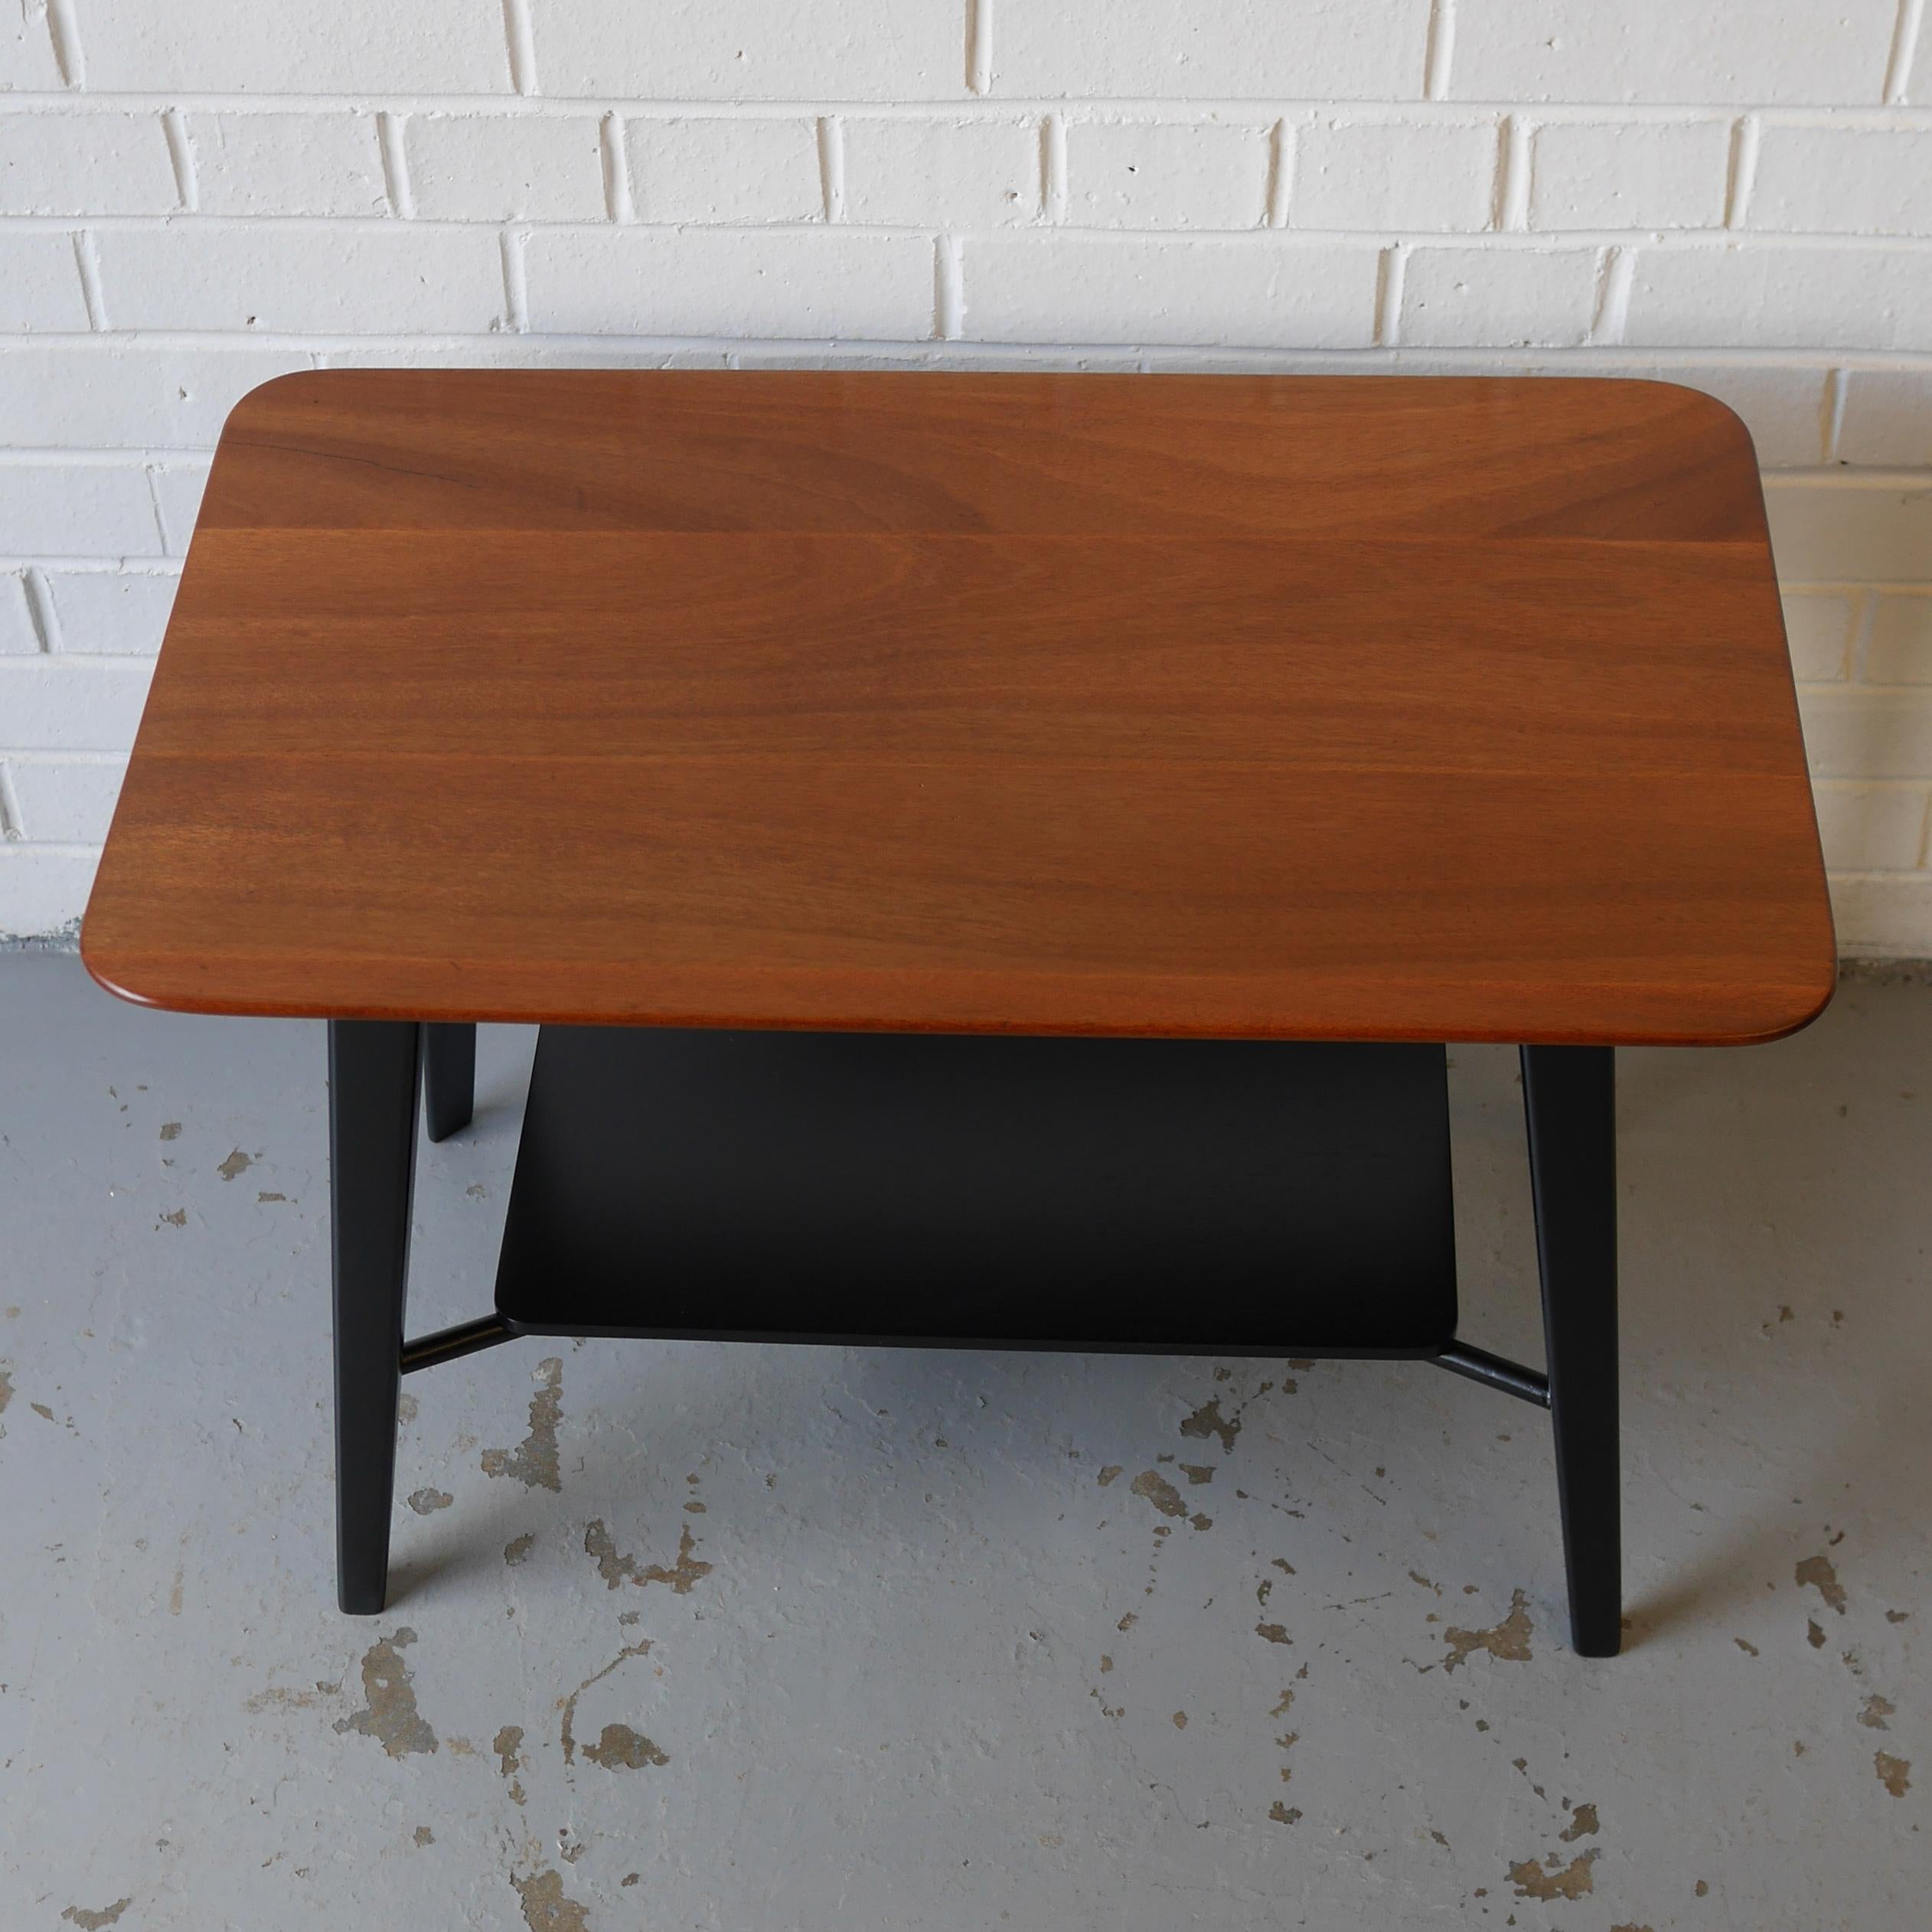 Solid Mahogany Coffee or Lamp Table by Vanson, circa 1955 In Good Condition For Sale In Derby, Derbyshire